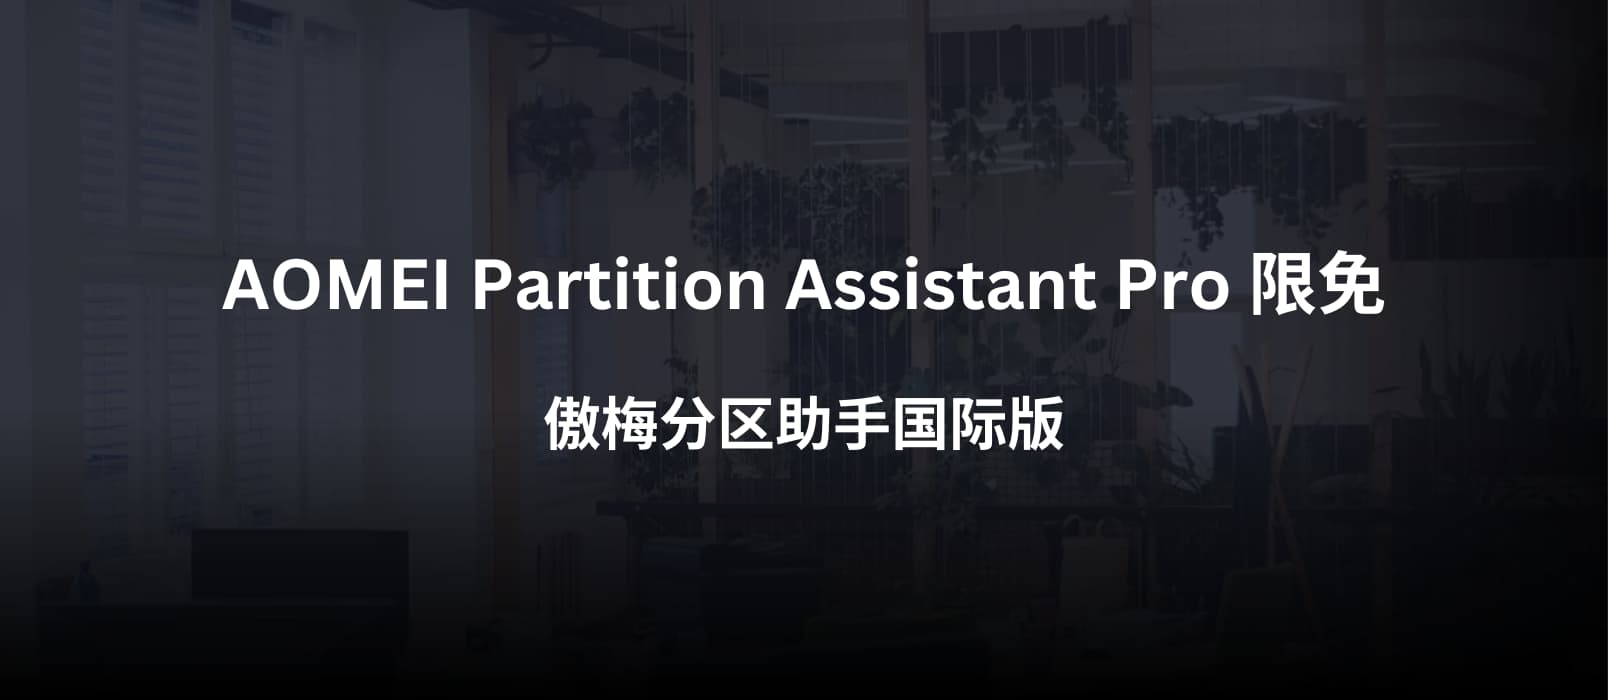 AOMEI Partition Assistant Pro 限免：傲梅分区助手国际版